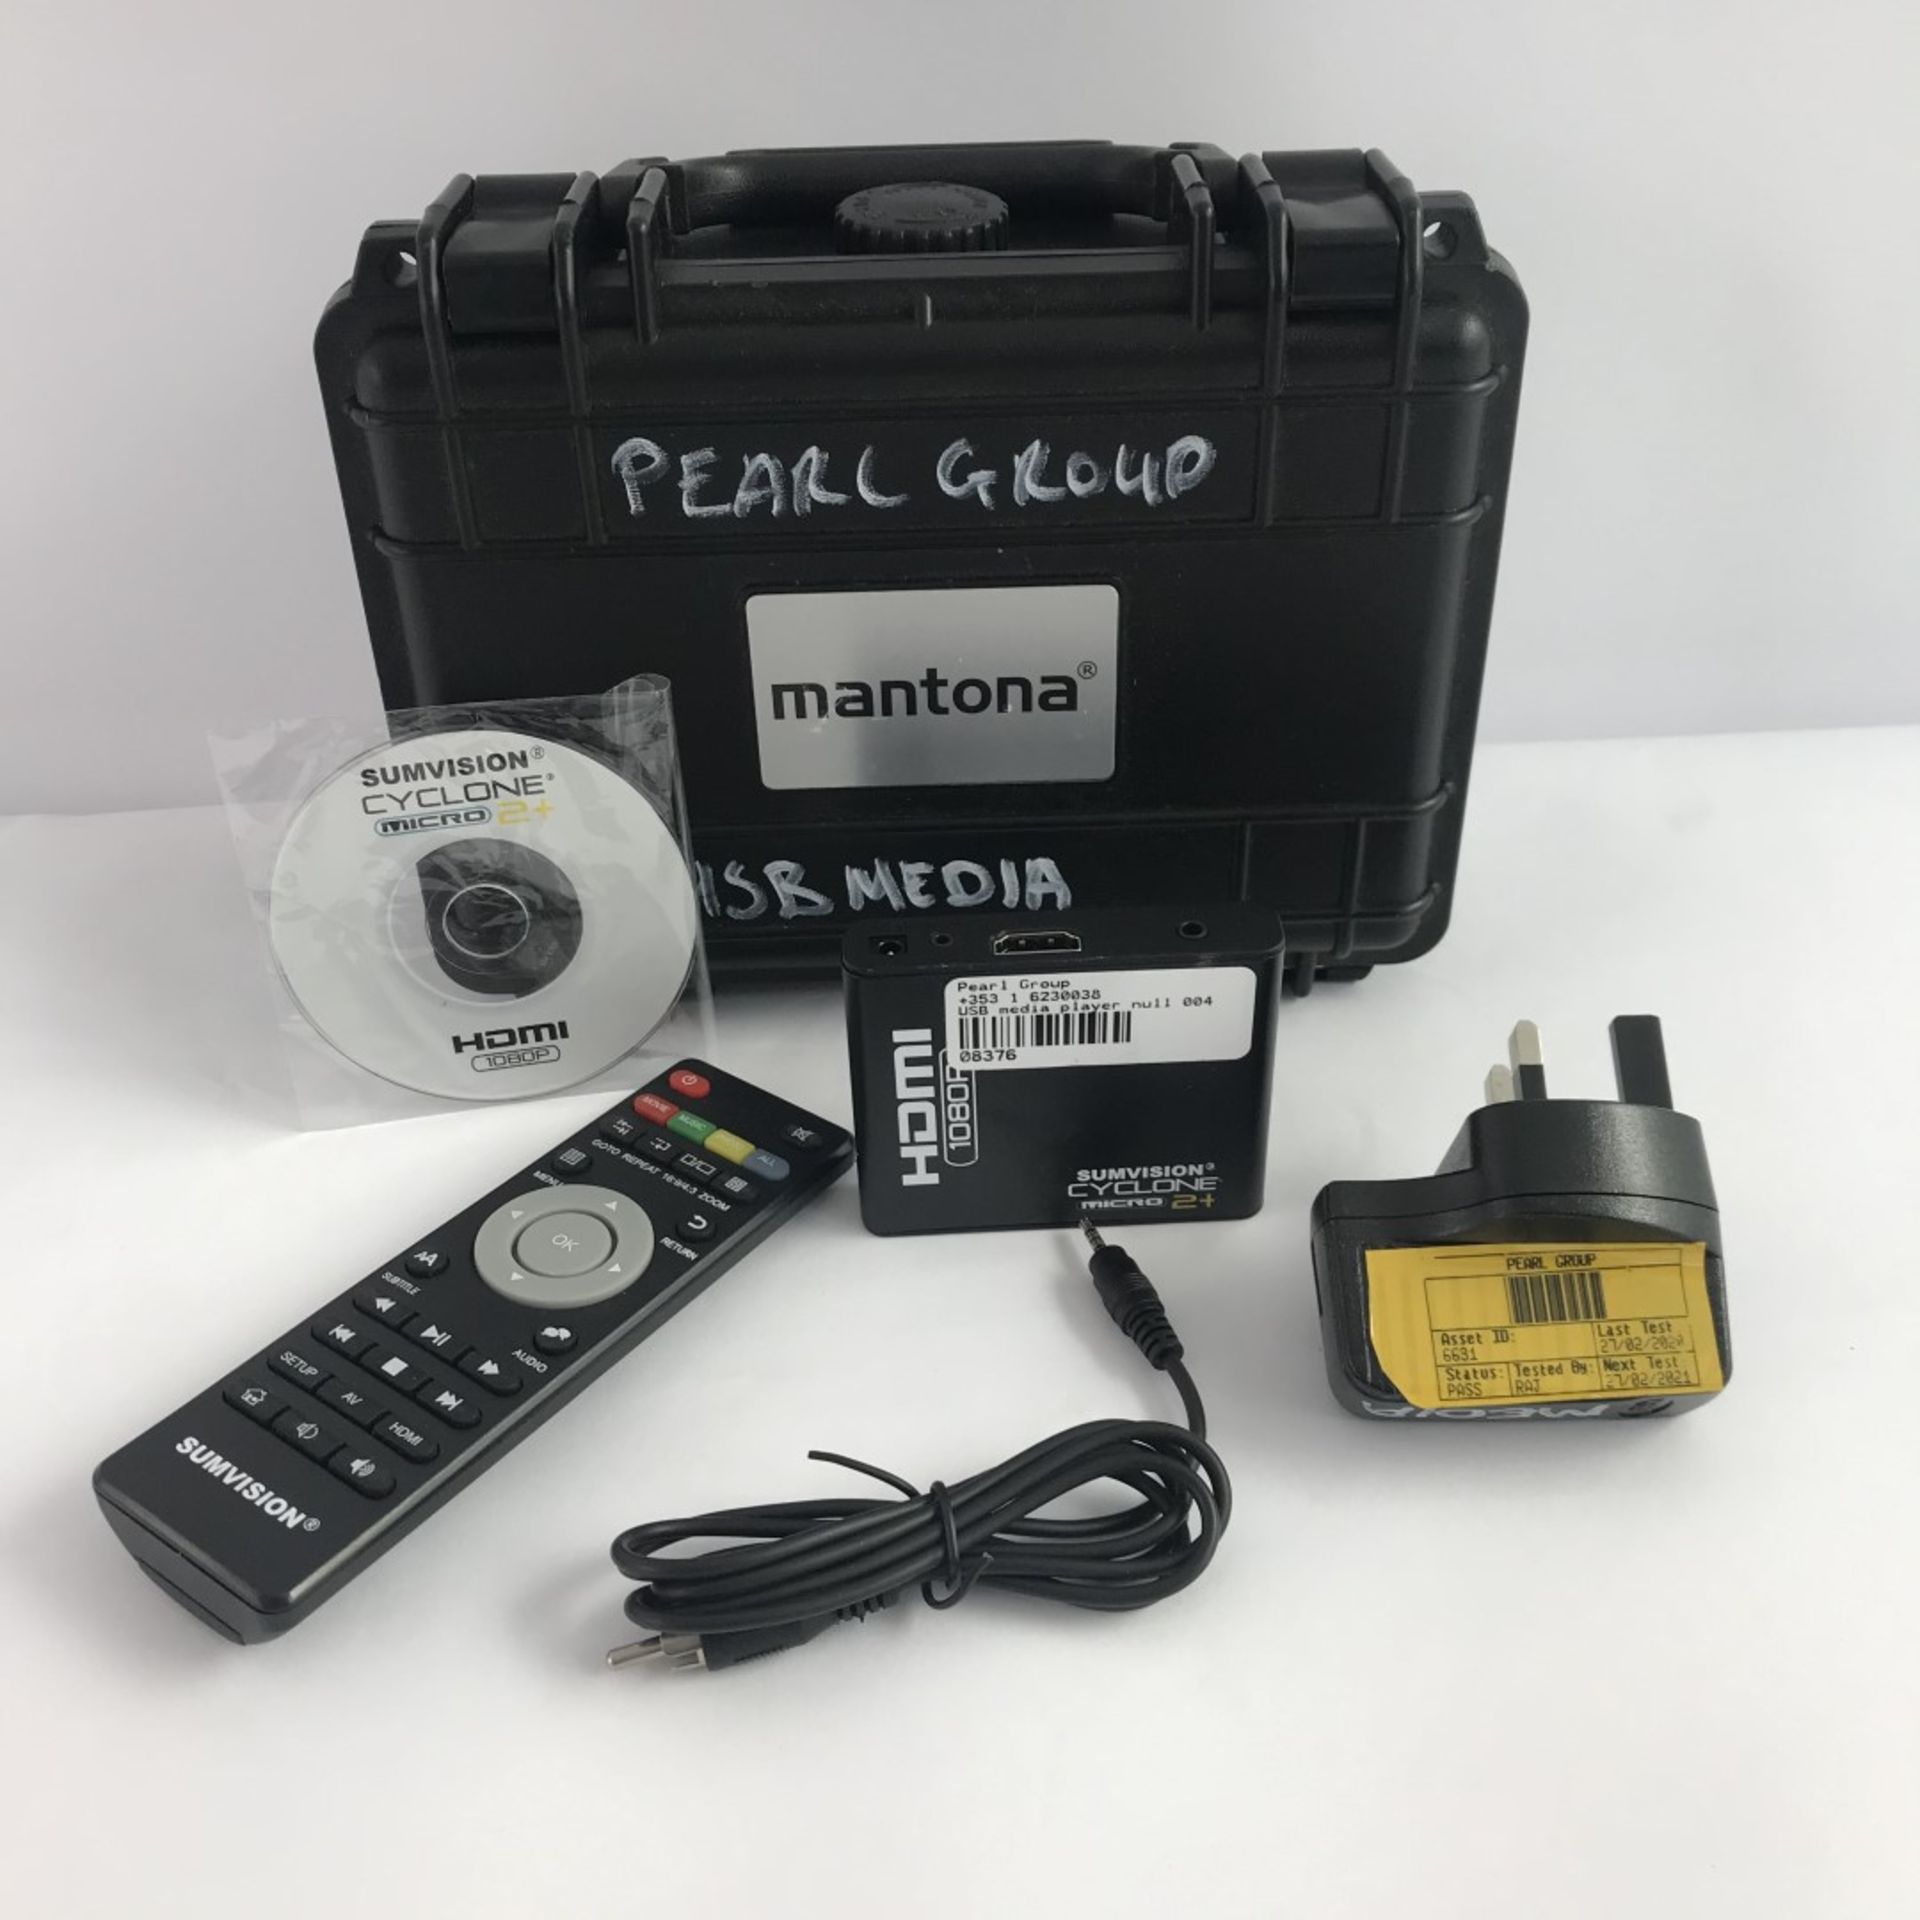 1 x Sumvision USB Media Player In Case - Ref: 84 - CL581 - Location: Altrincham WA14Items will be